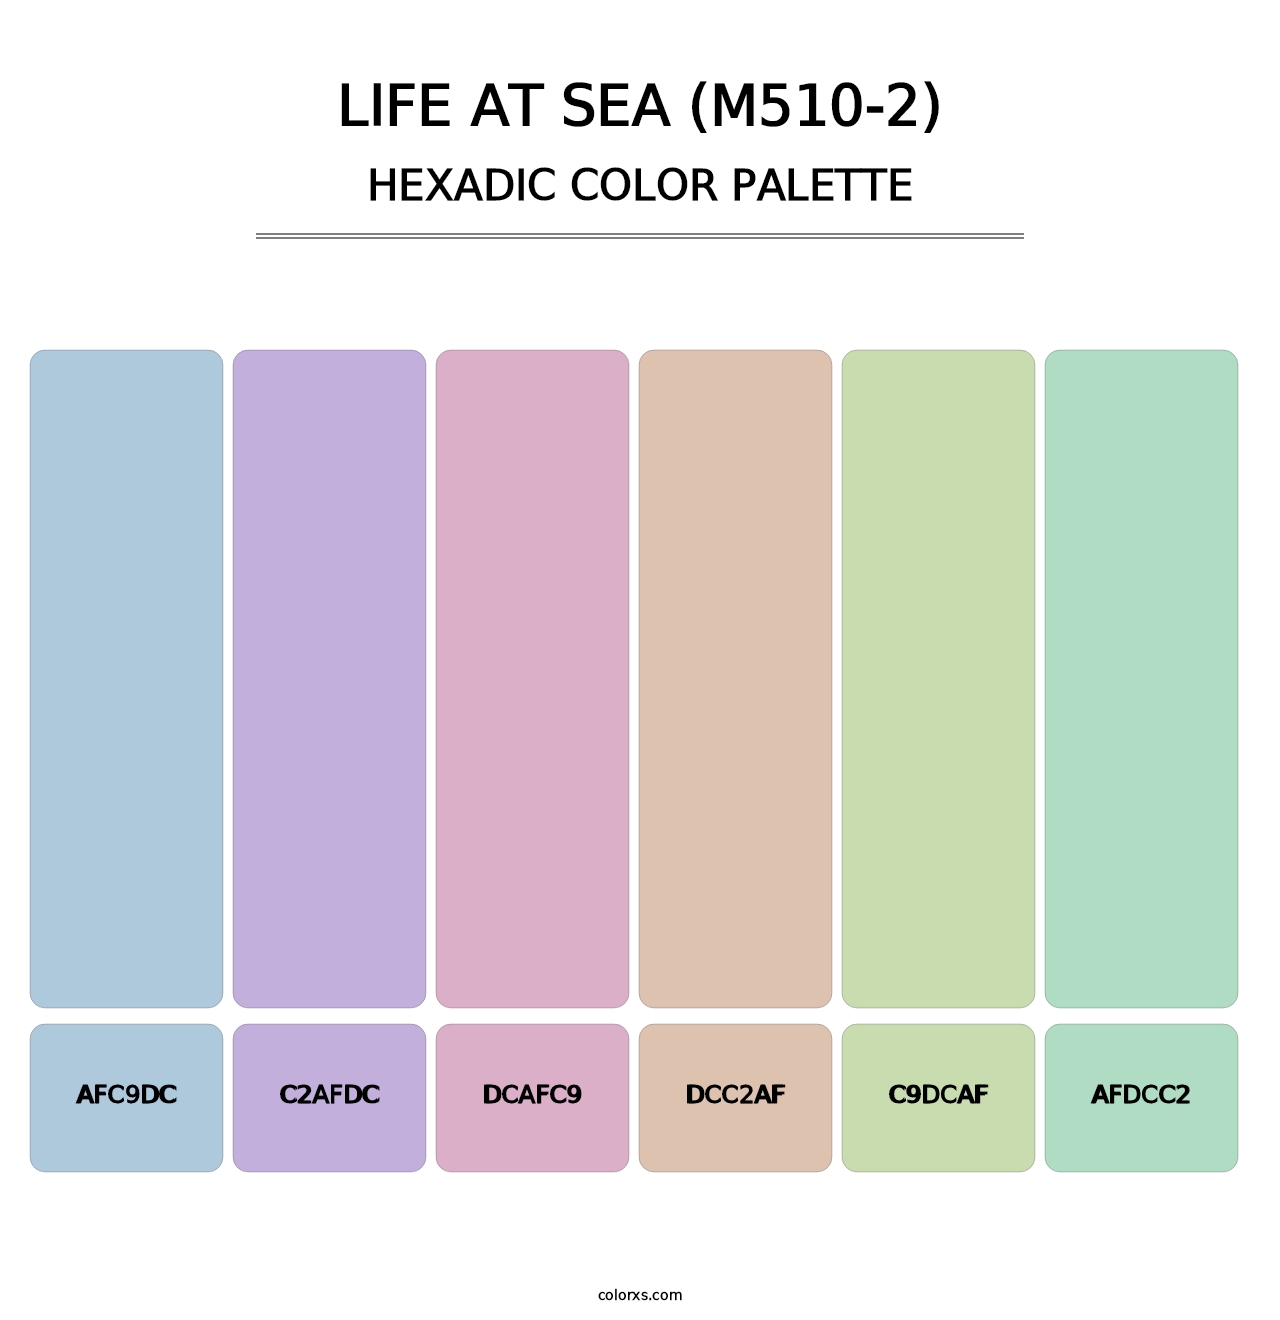 Life At Sea (M510-2) - Hexadic Color Palette